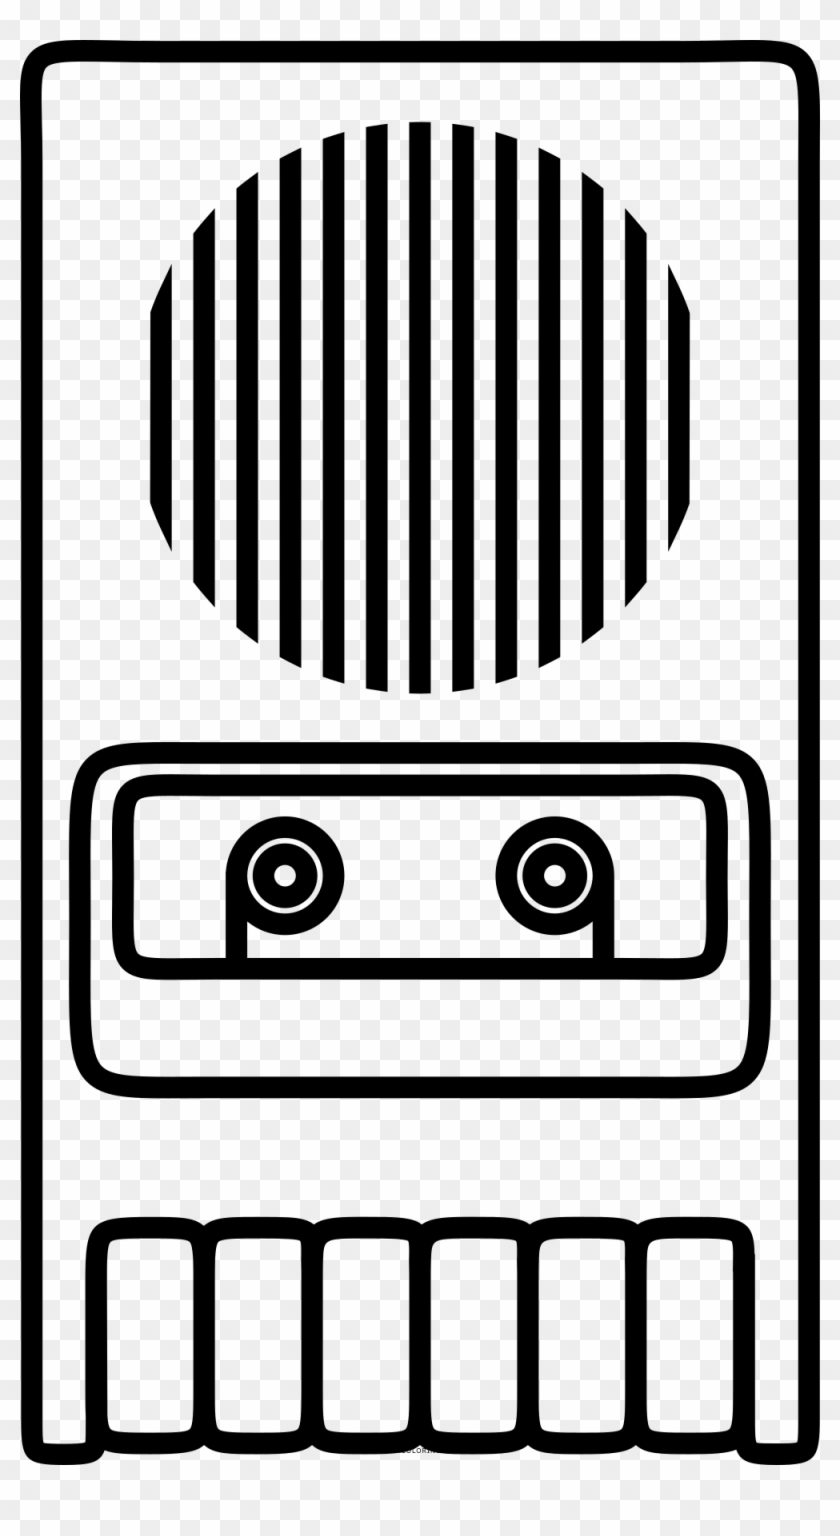 Tape Recorder Coloring Page - It's A Boy Sports #1627771